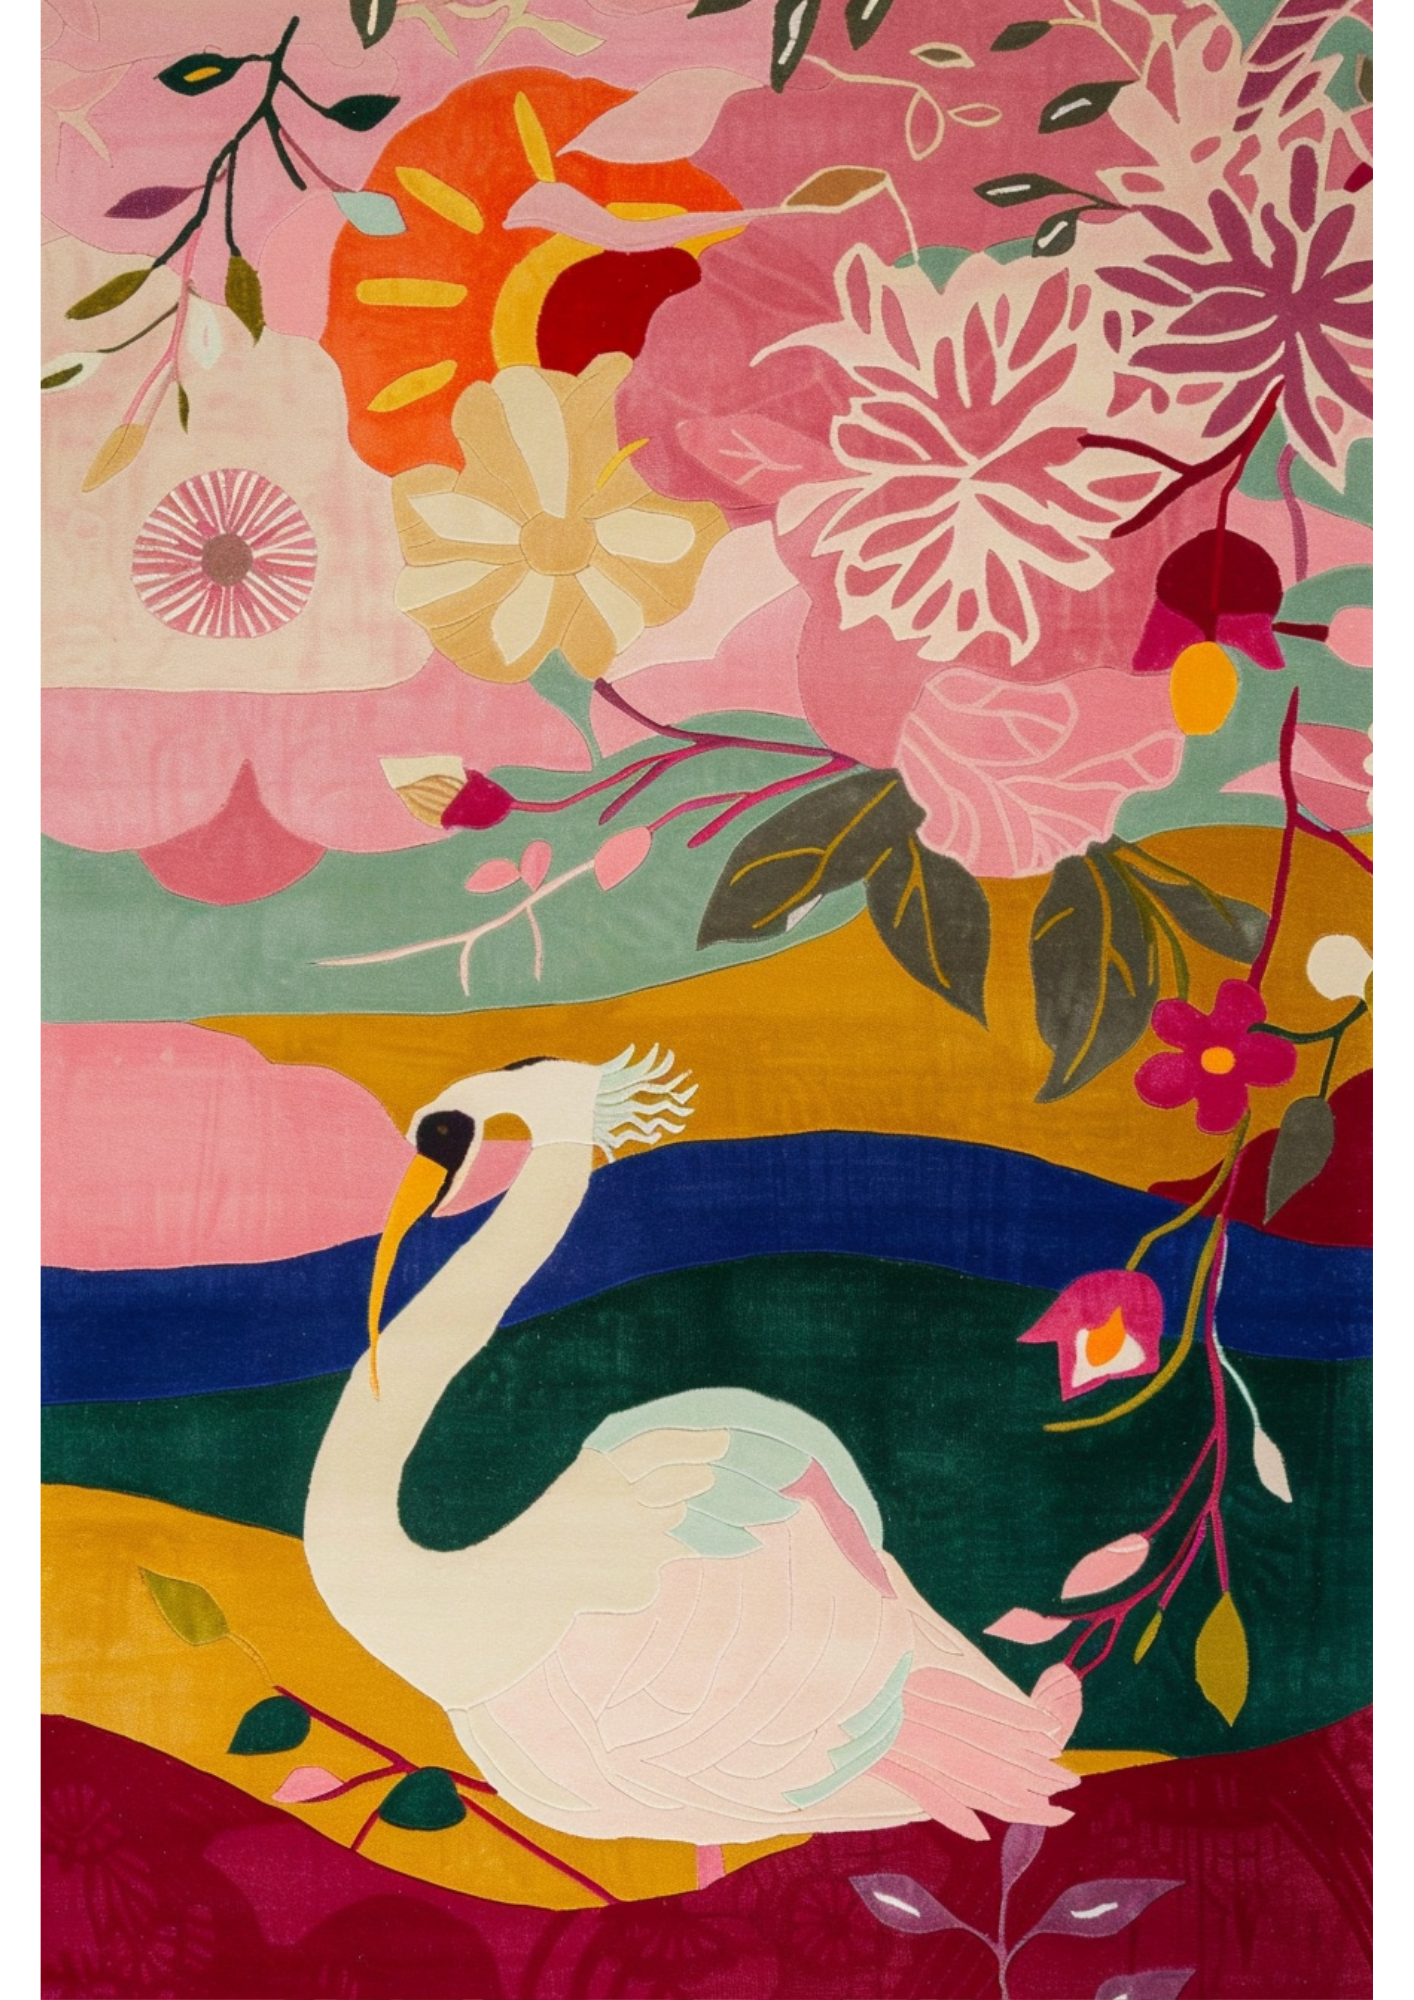 Immerse yourself in the serene beauty of our Colorful Swan Lake Hand Tufted Rug. This enchanting piece captures the graceful elegance of a swan across a vibrant canvas. Each stroke of color and delicate detail is meticulously hand-tufted, bringing the scene to life with exquisite artistry.